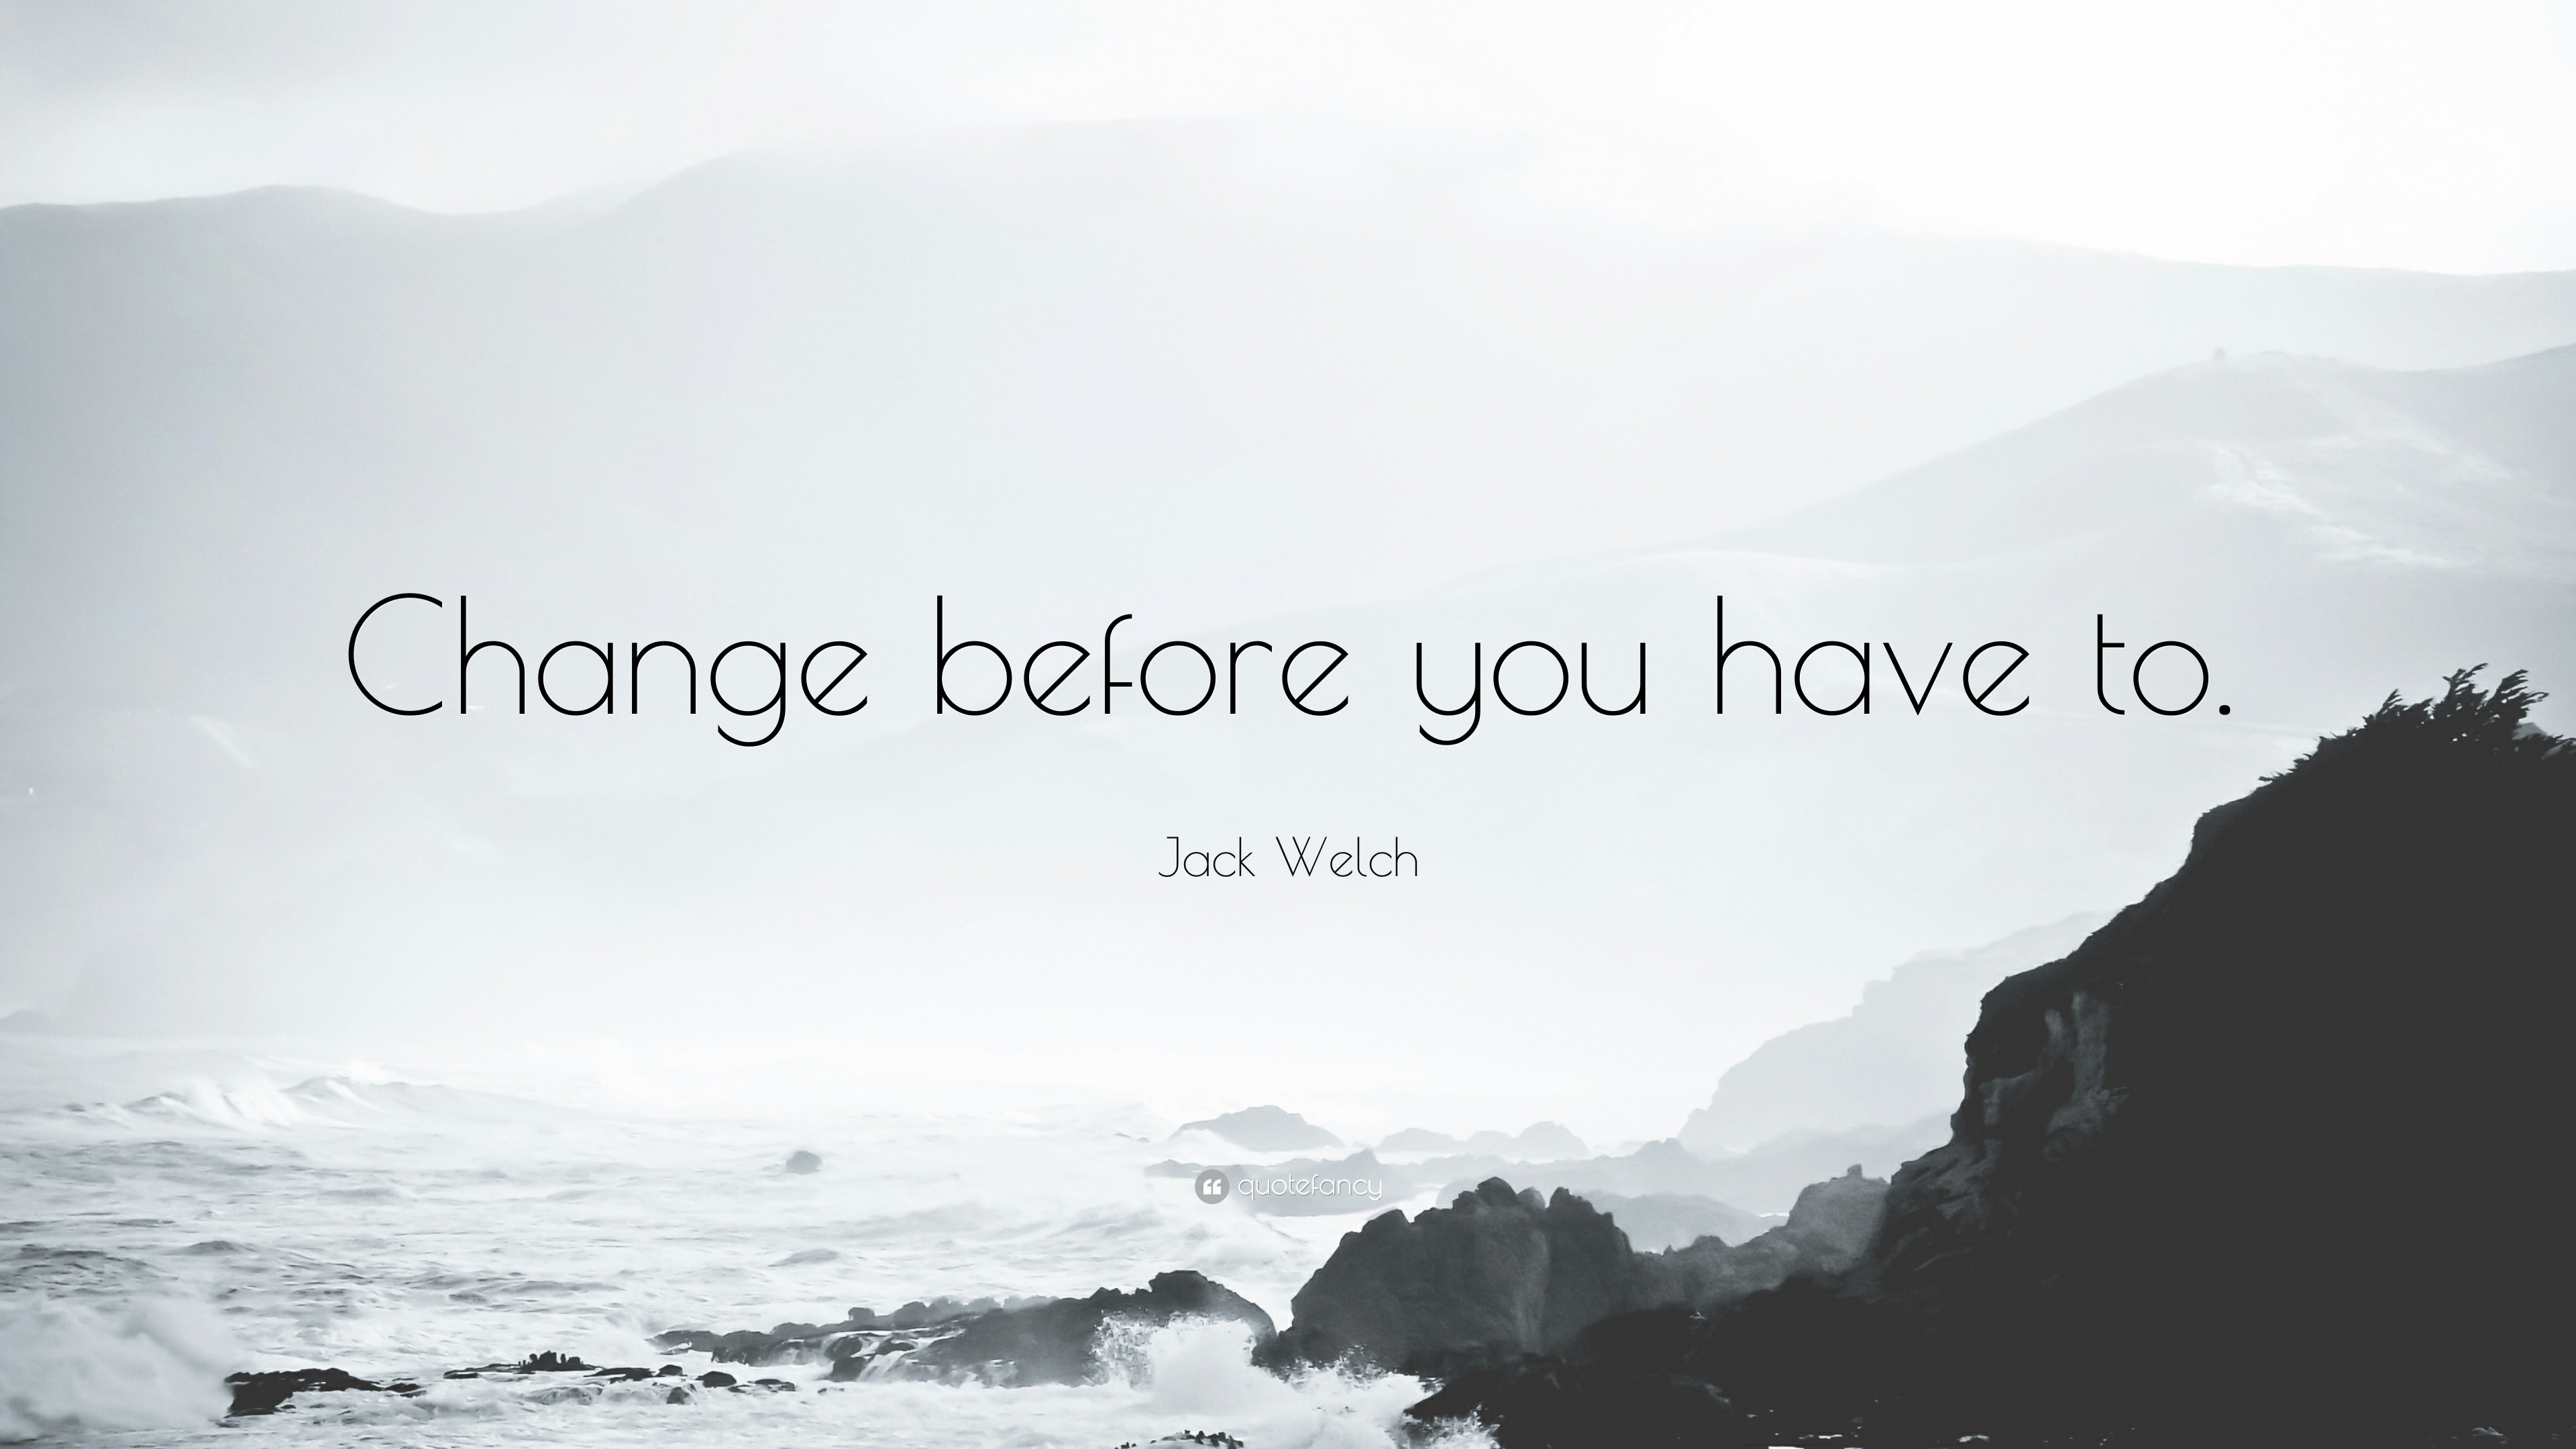 Jack Welch Quote Change Before You Have To